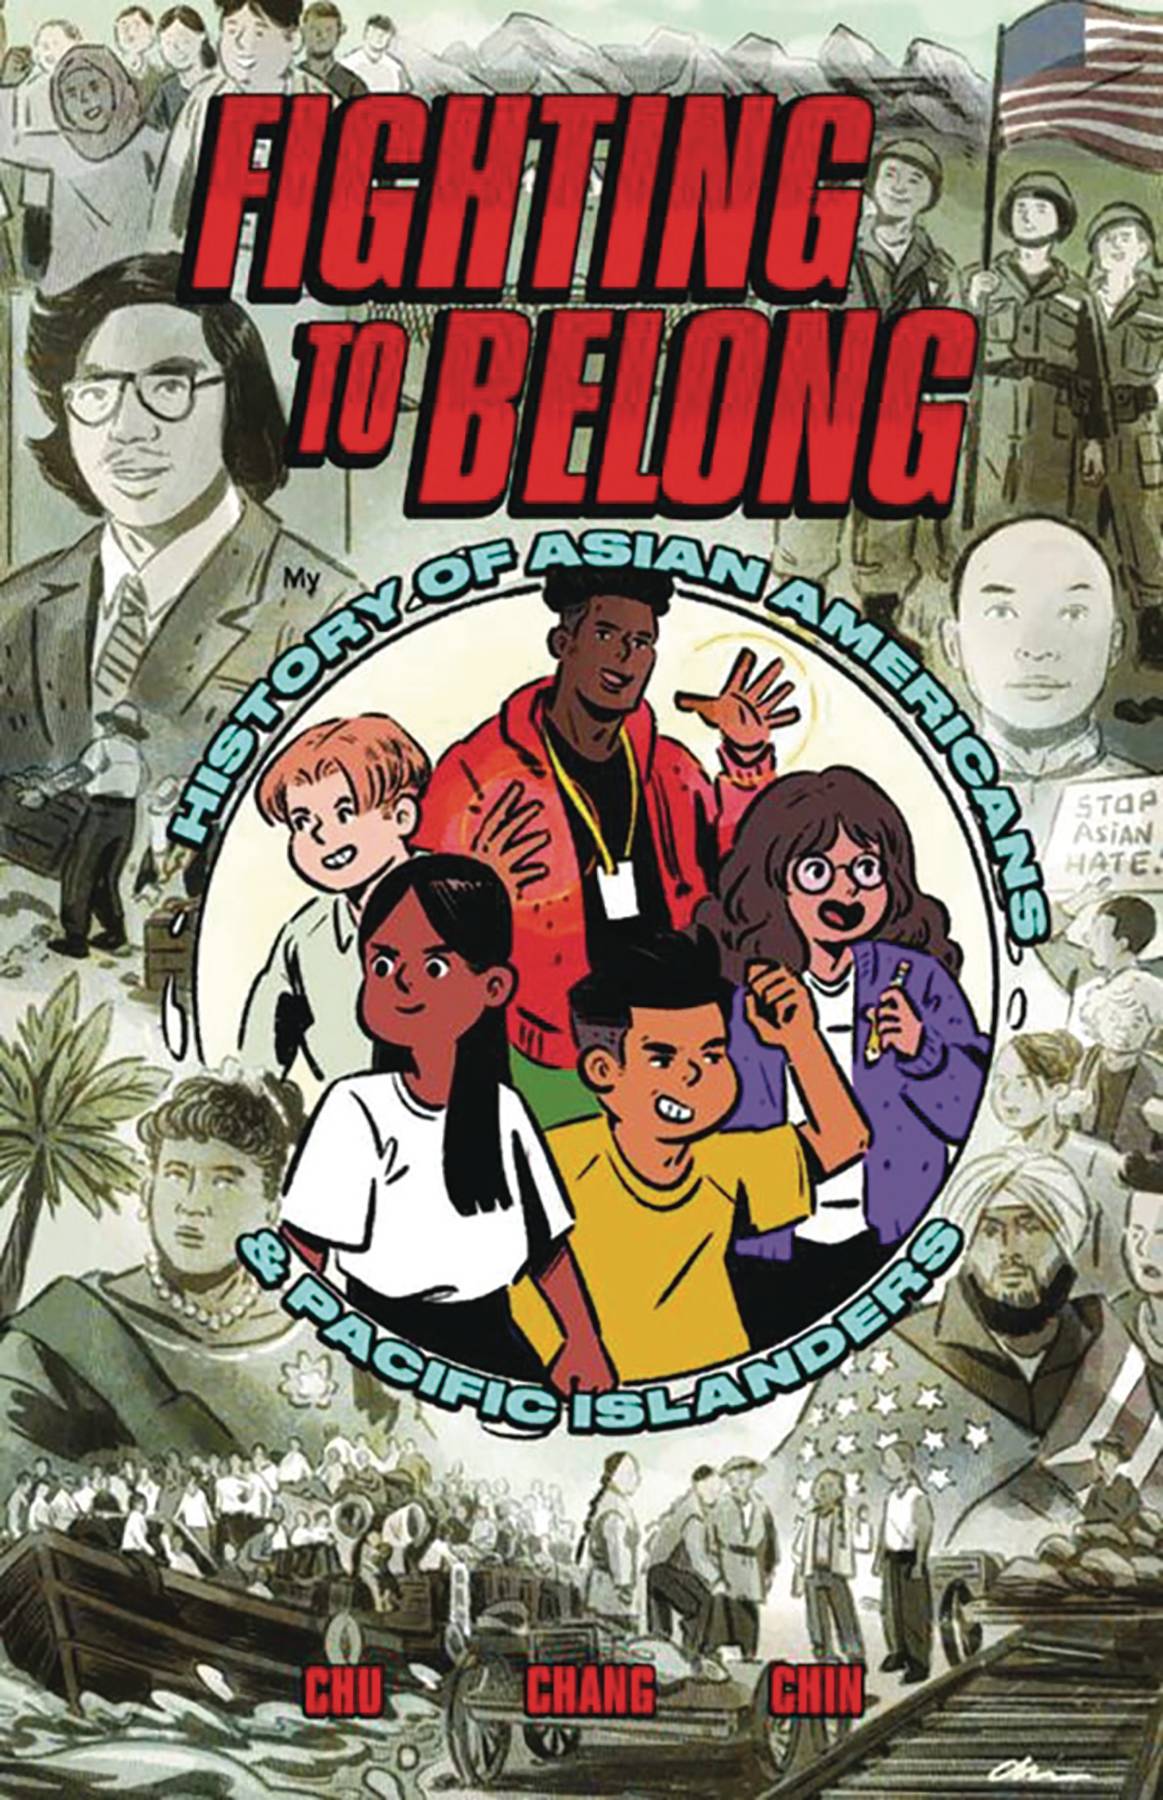 FIGHTING TO BELONG HIST ASIAN AMERICAN GN